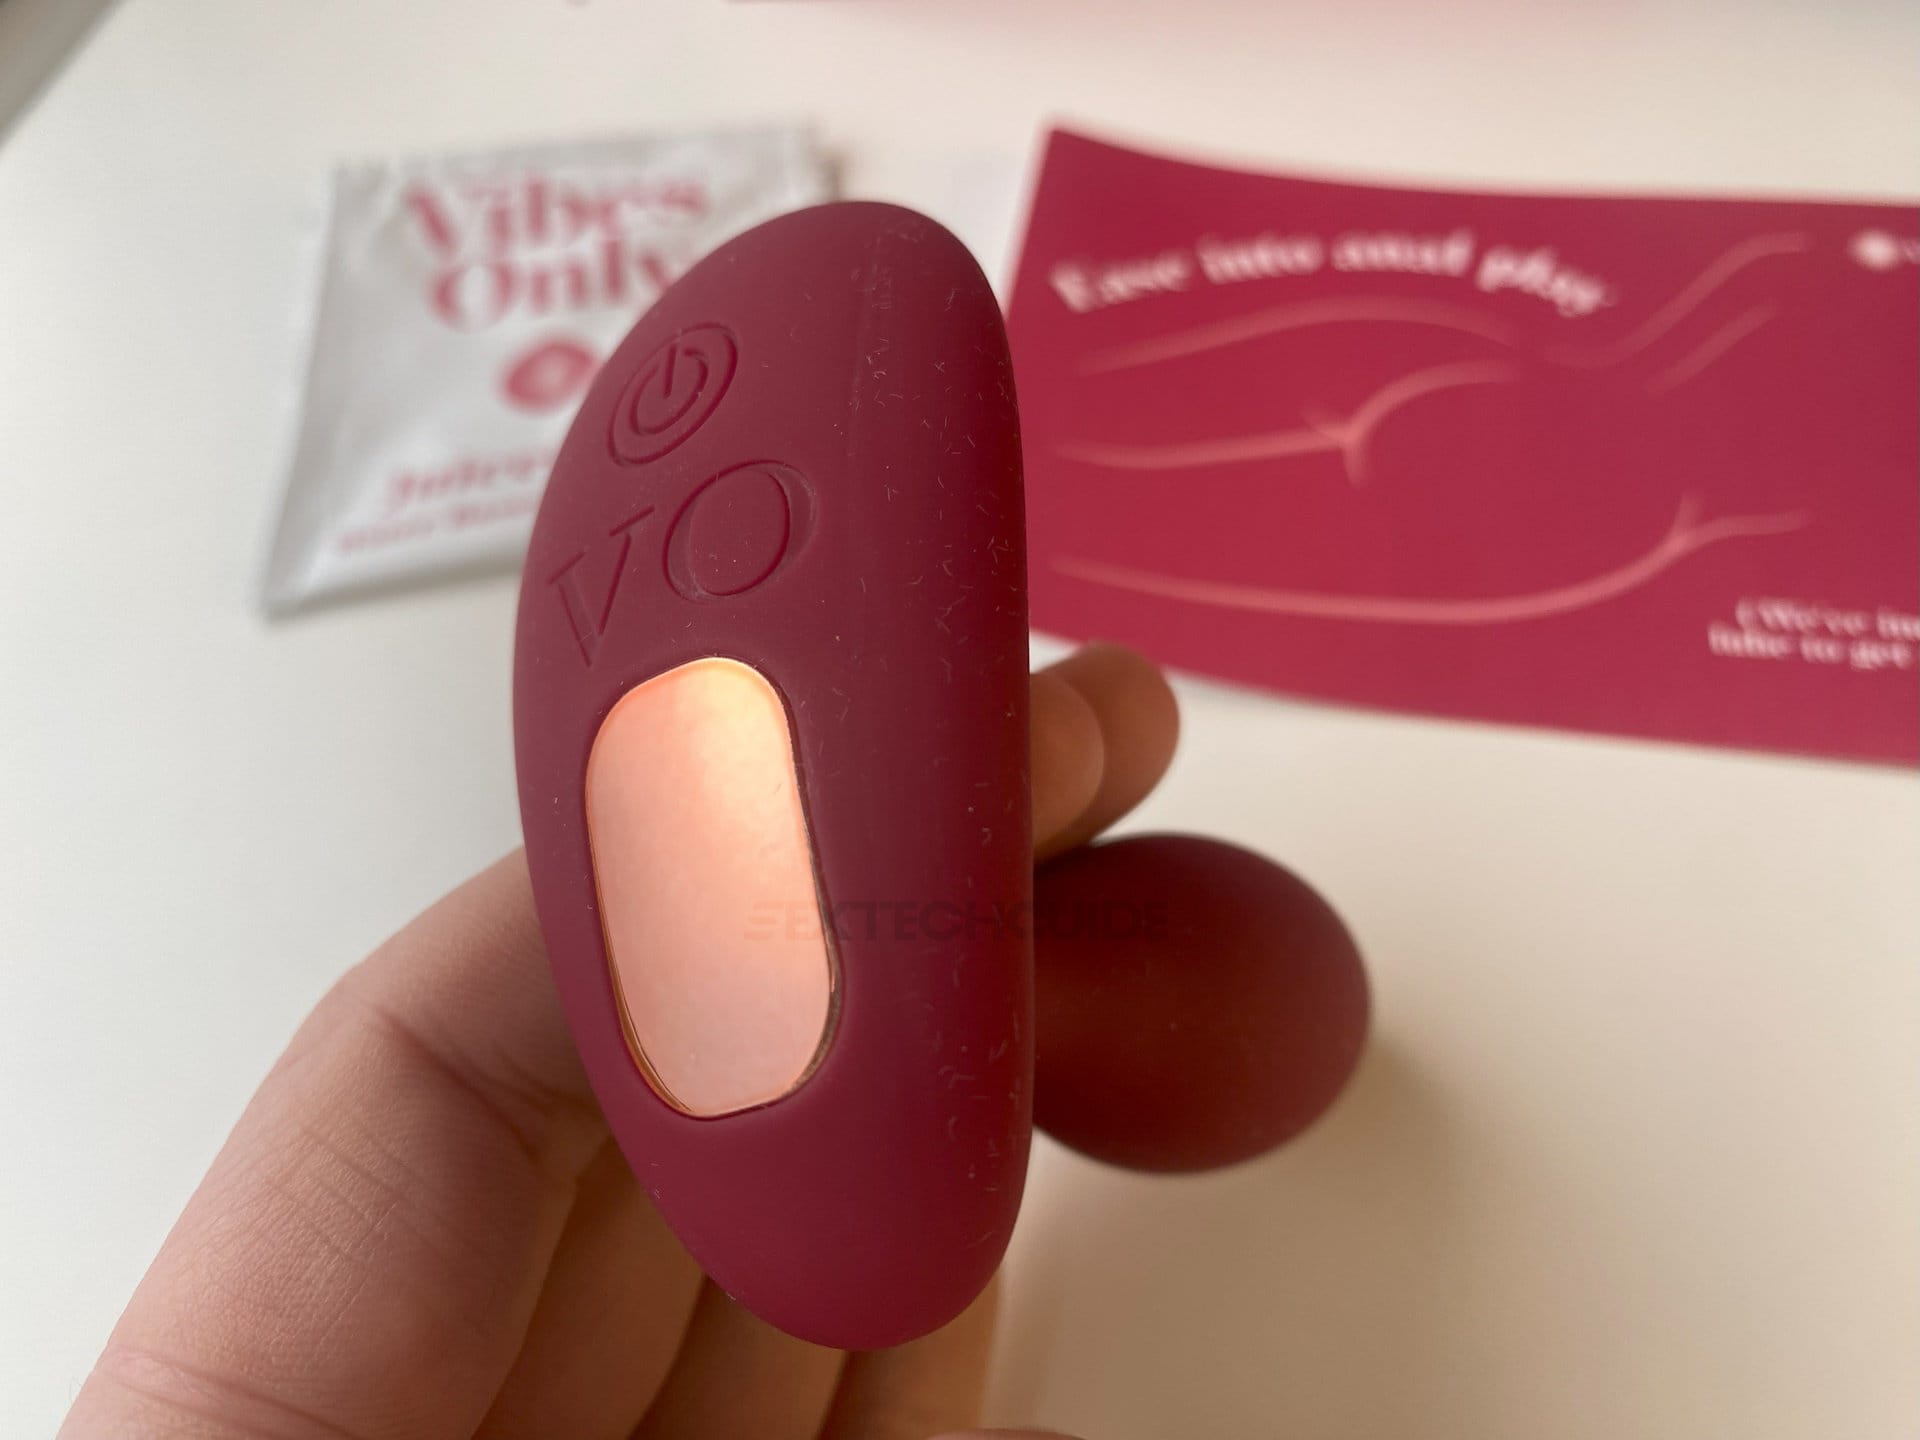 A person is holding a red vibrator, experiencing the stimulating vibes.